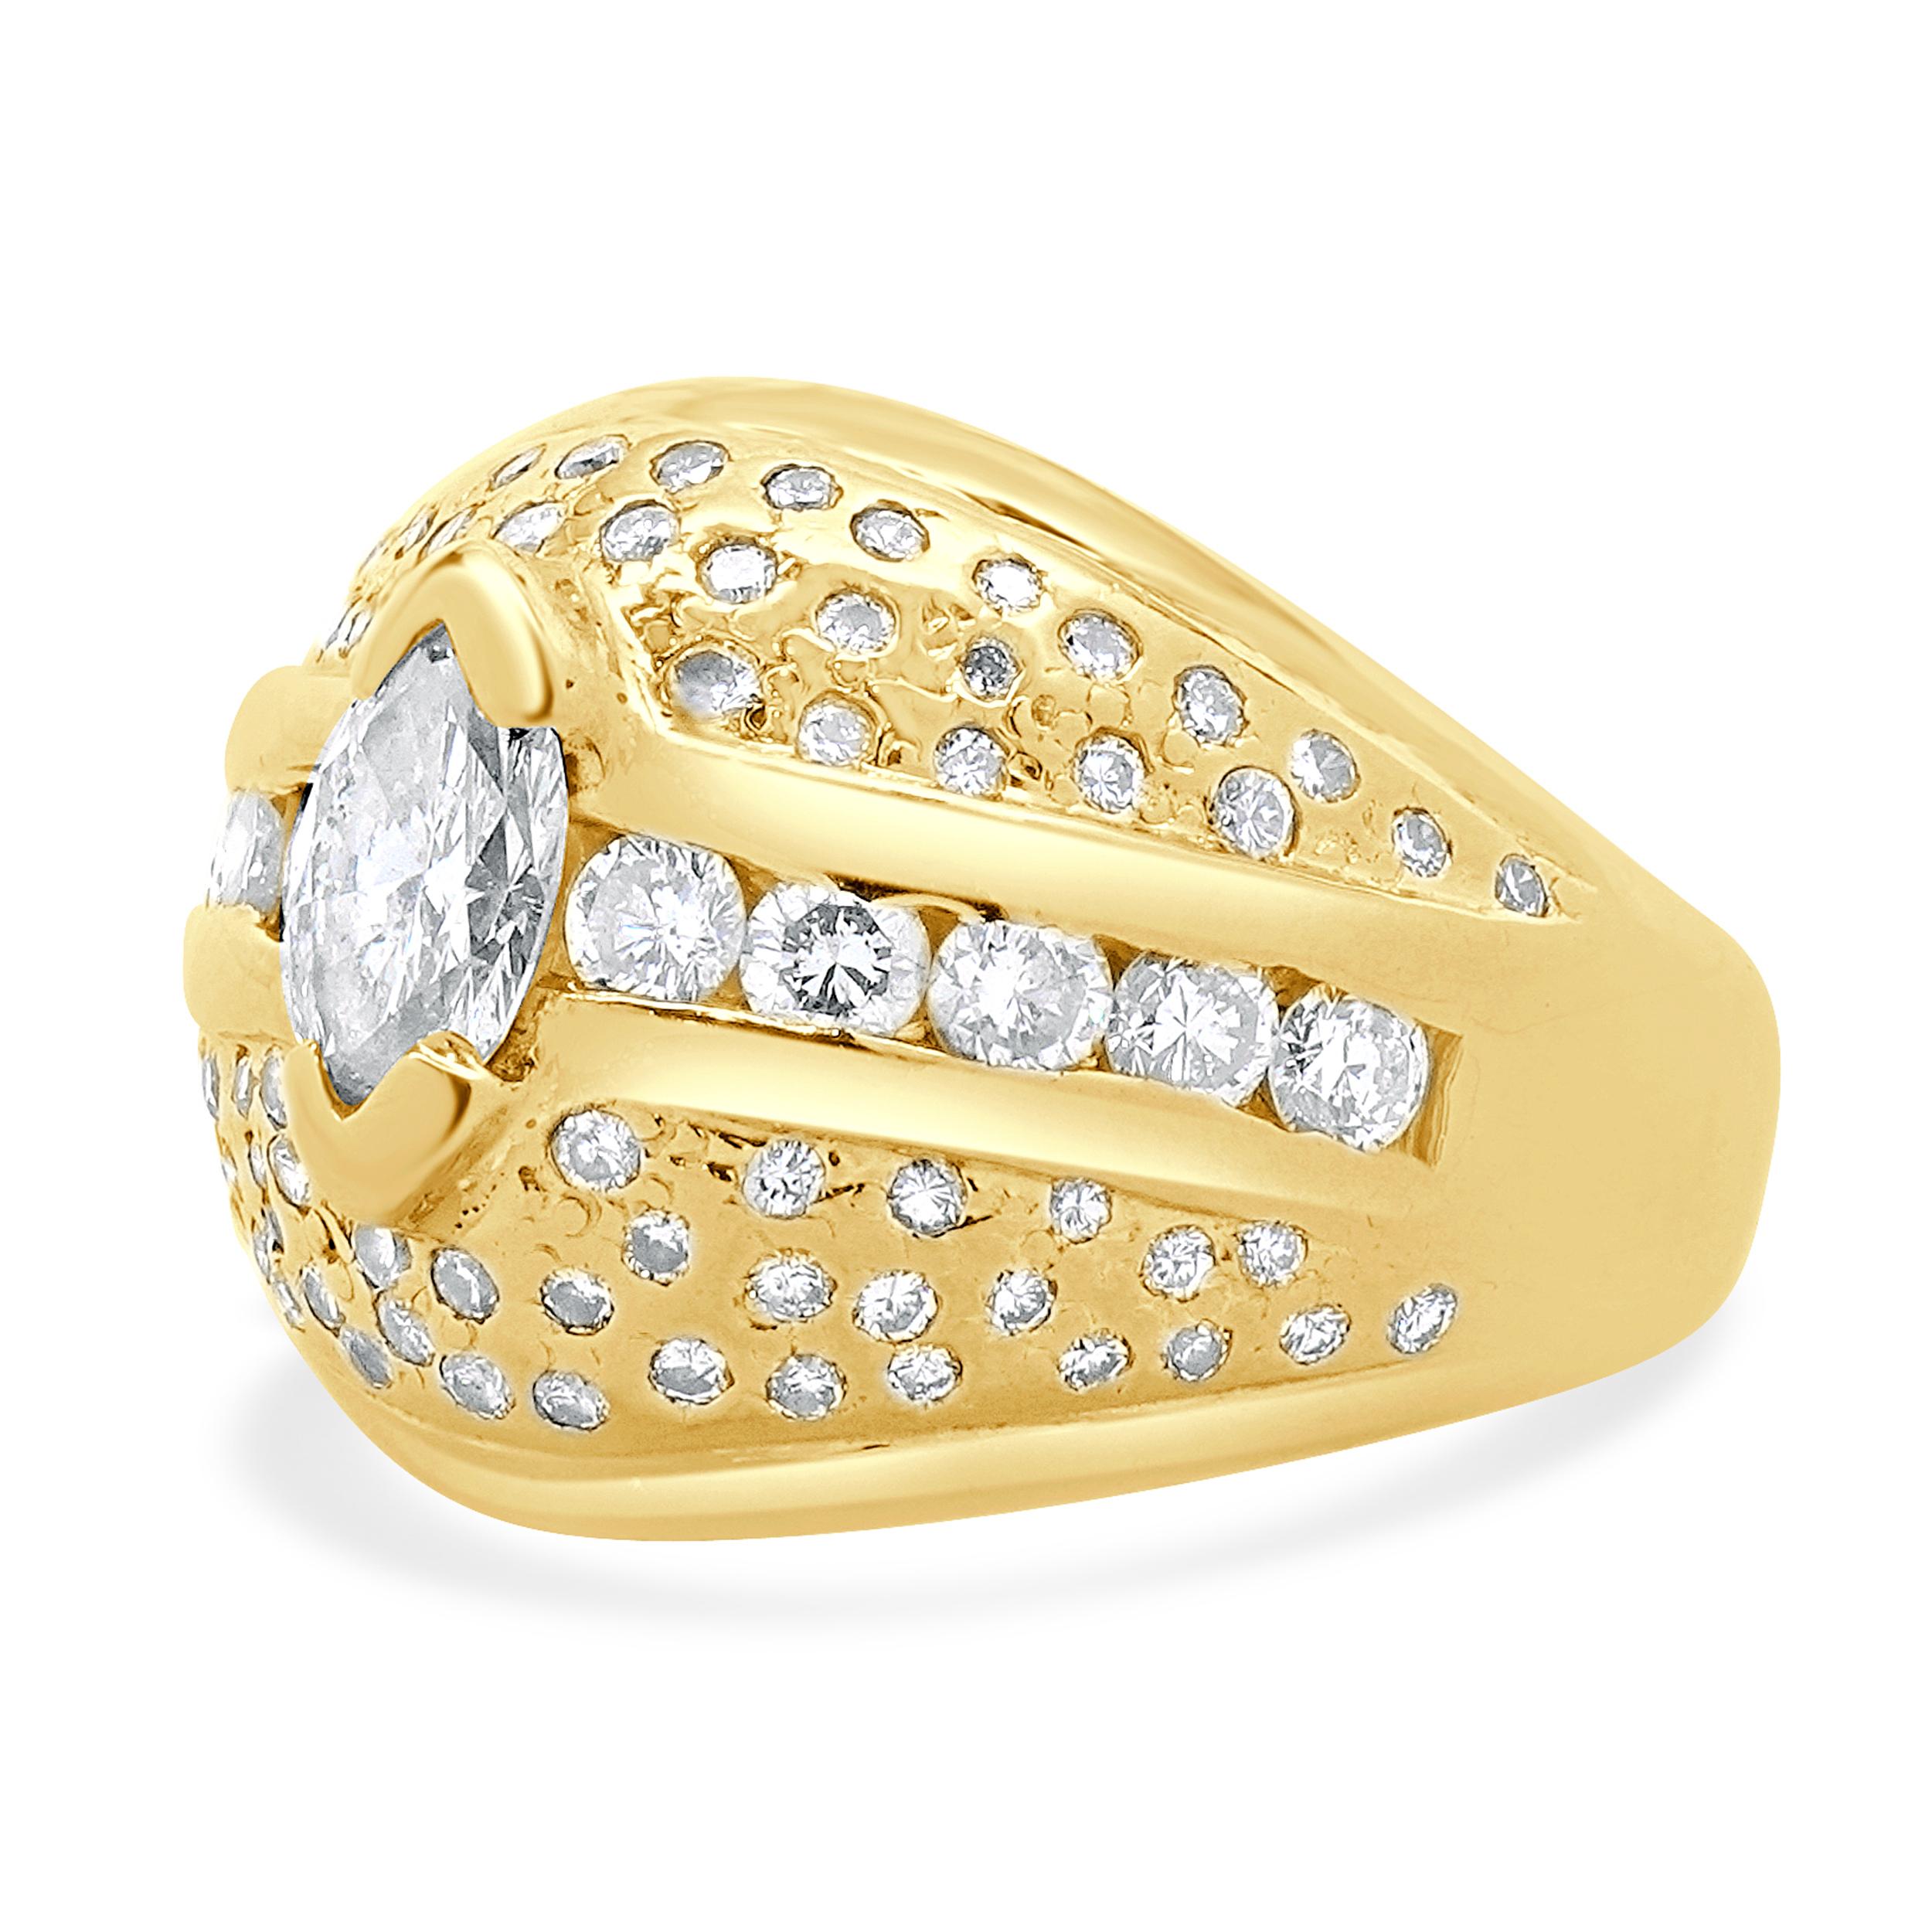 Designer: custom
Material: 14K yellow gold
Diamond: 1 marquise cut = 0.30ct
Color: H 
Clarity: SI1
Diamond: 87 round brilliant cut = 0.50cttw
Color: H 
Clarity: SI1
Ring size: 4 (please allow two additional shipping days for sizing requests)
Weight: